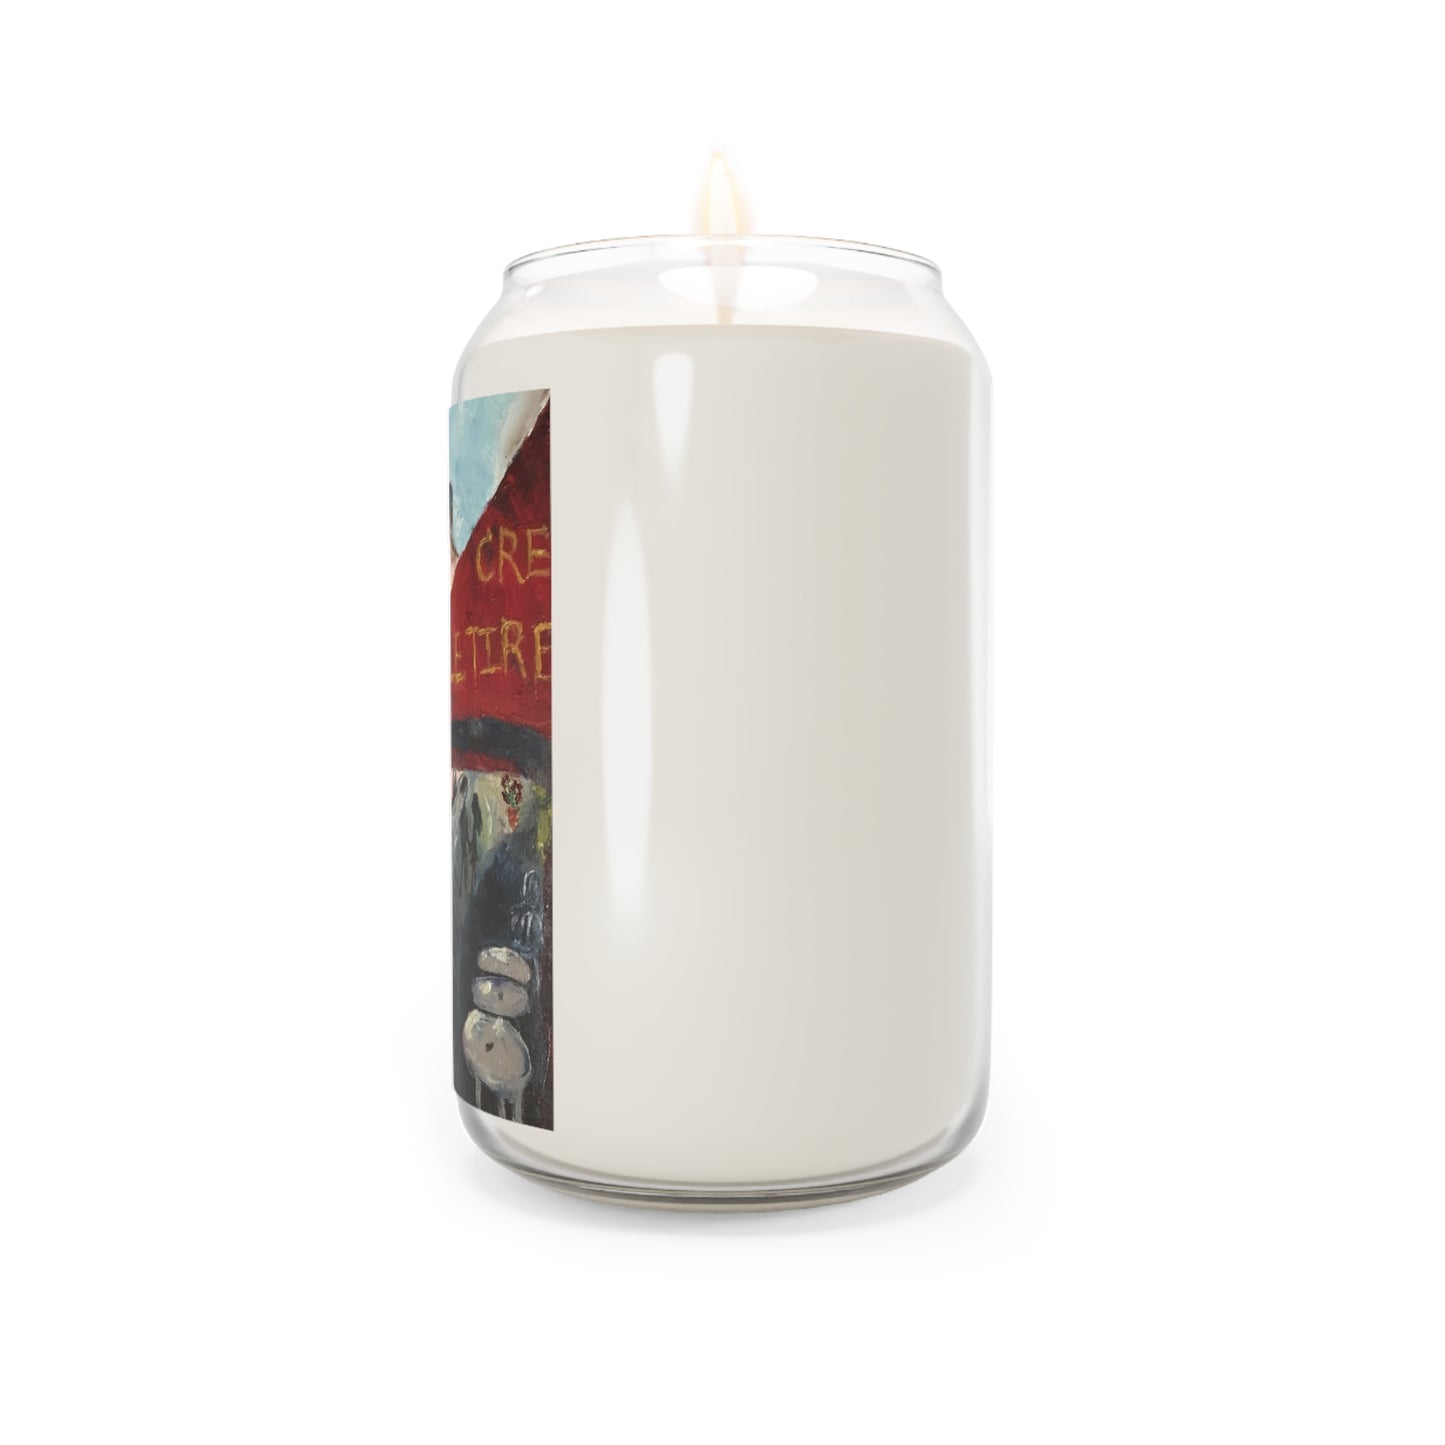 Cafe Mont Martre (in Paris) Scented Candle, 13.75oz